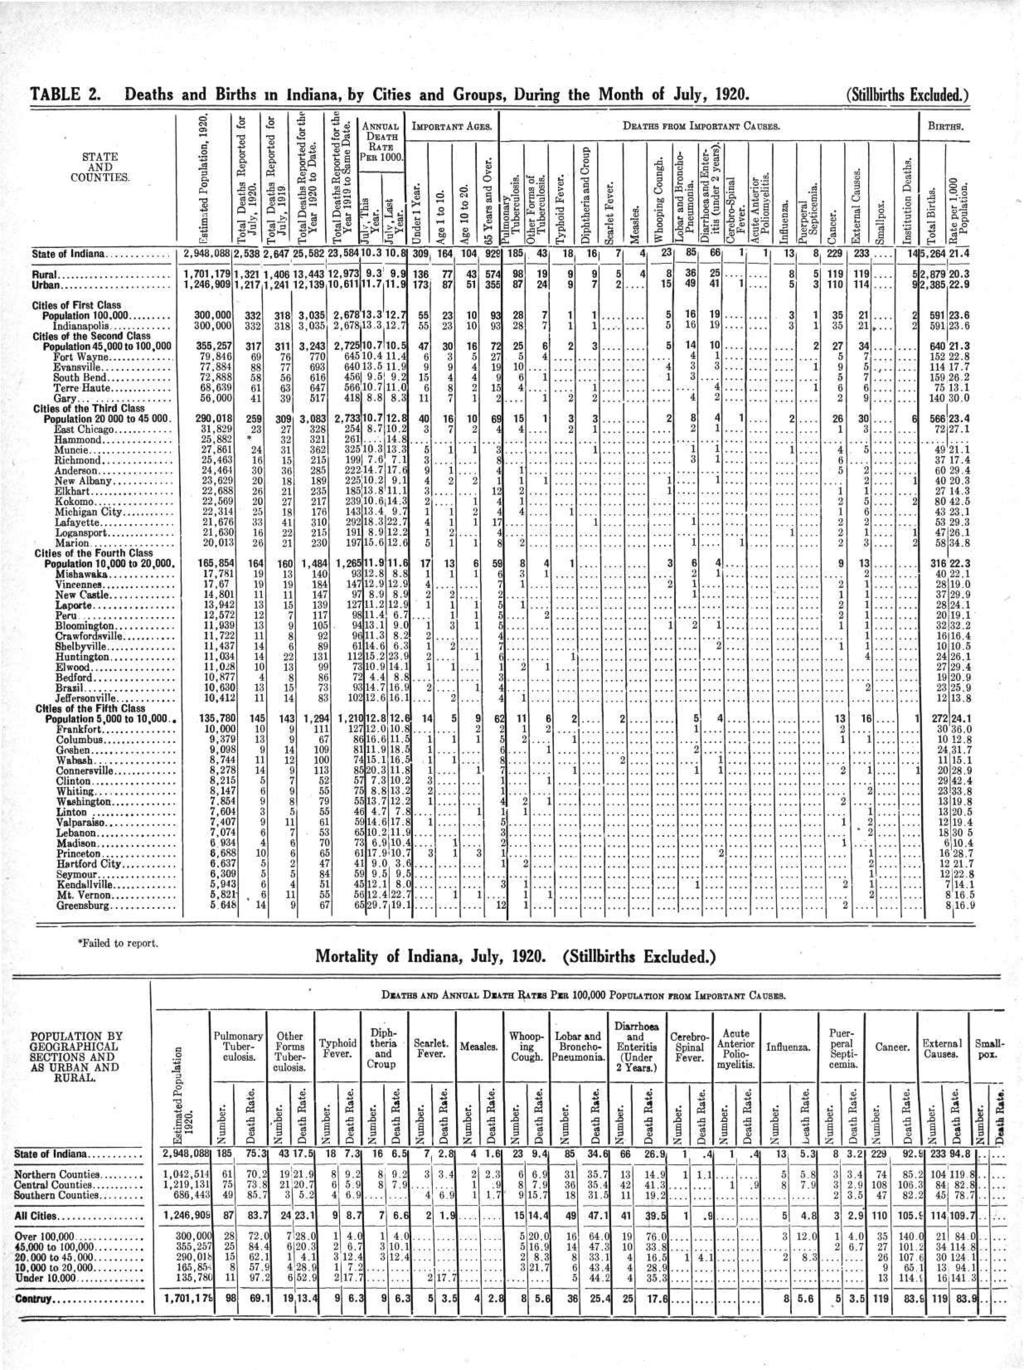 TABLE 2. Deaths and Births in Indiana, by Cities and Groups, During the Month of July, 1920. (Stillbirths Excluded.) STATE AND COUNTIES. State of Indiana. Estimated Population, 1920.